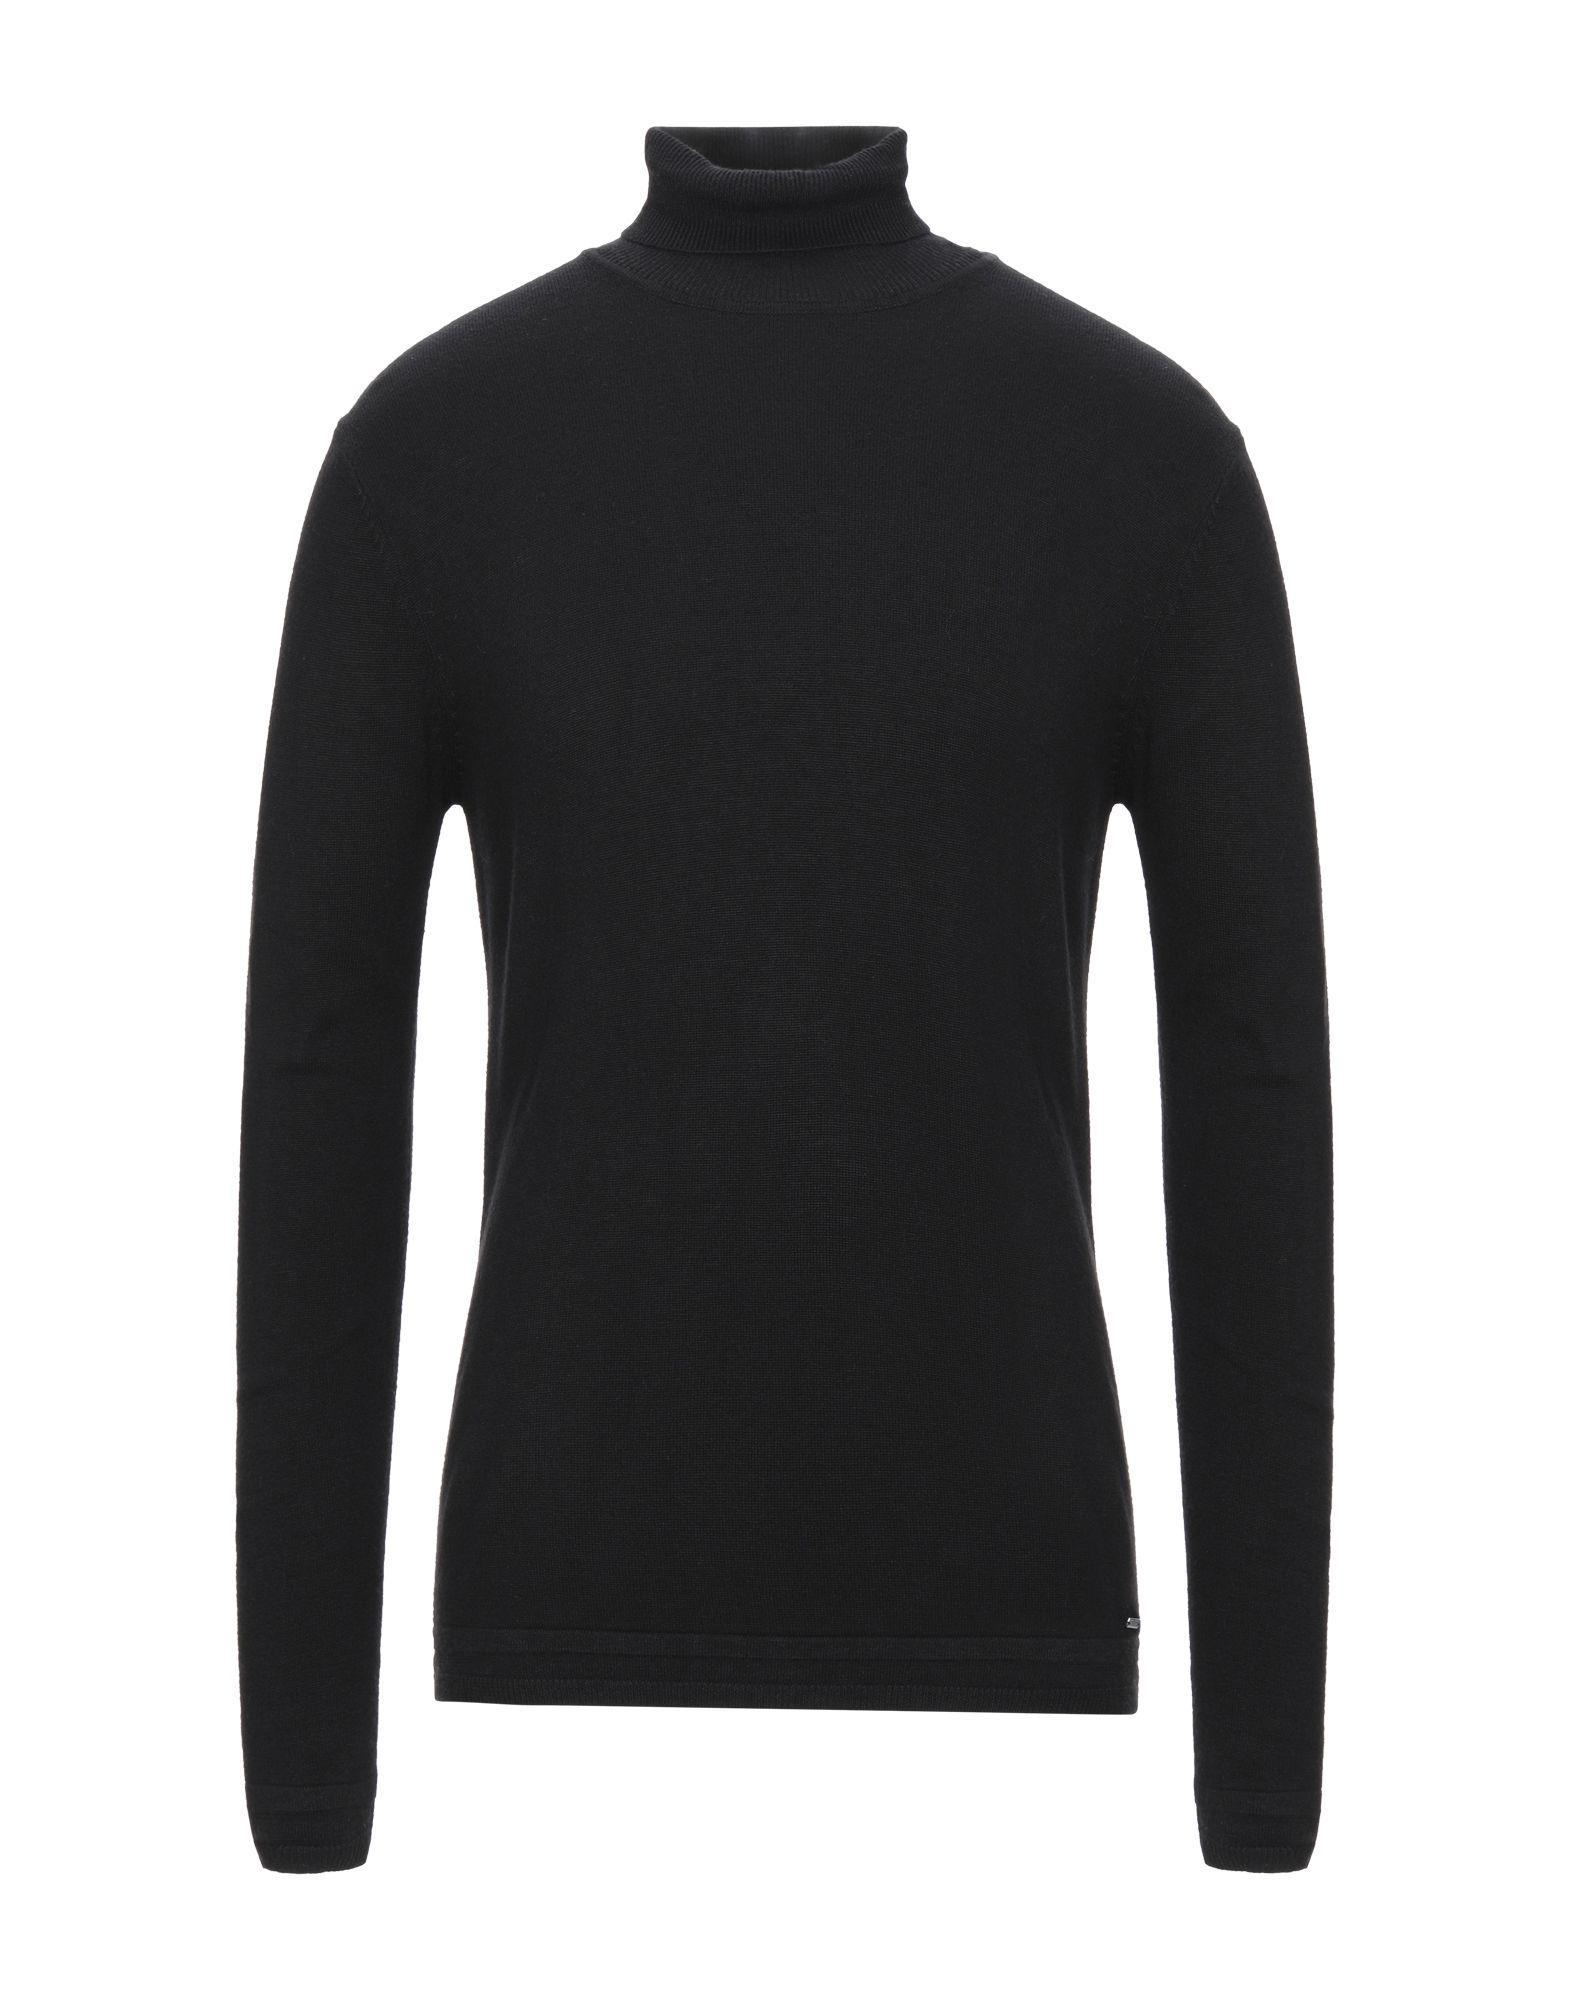 Guess Synthetic Turtleneck in Black for Men - Lyst